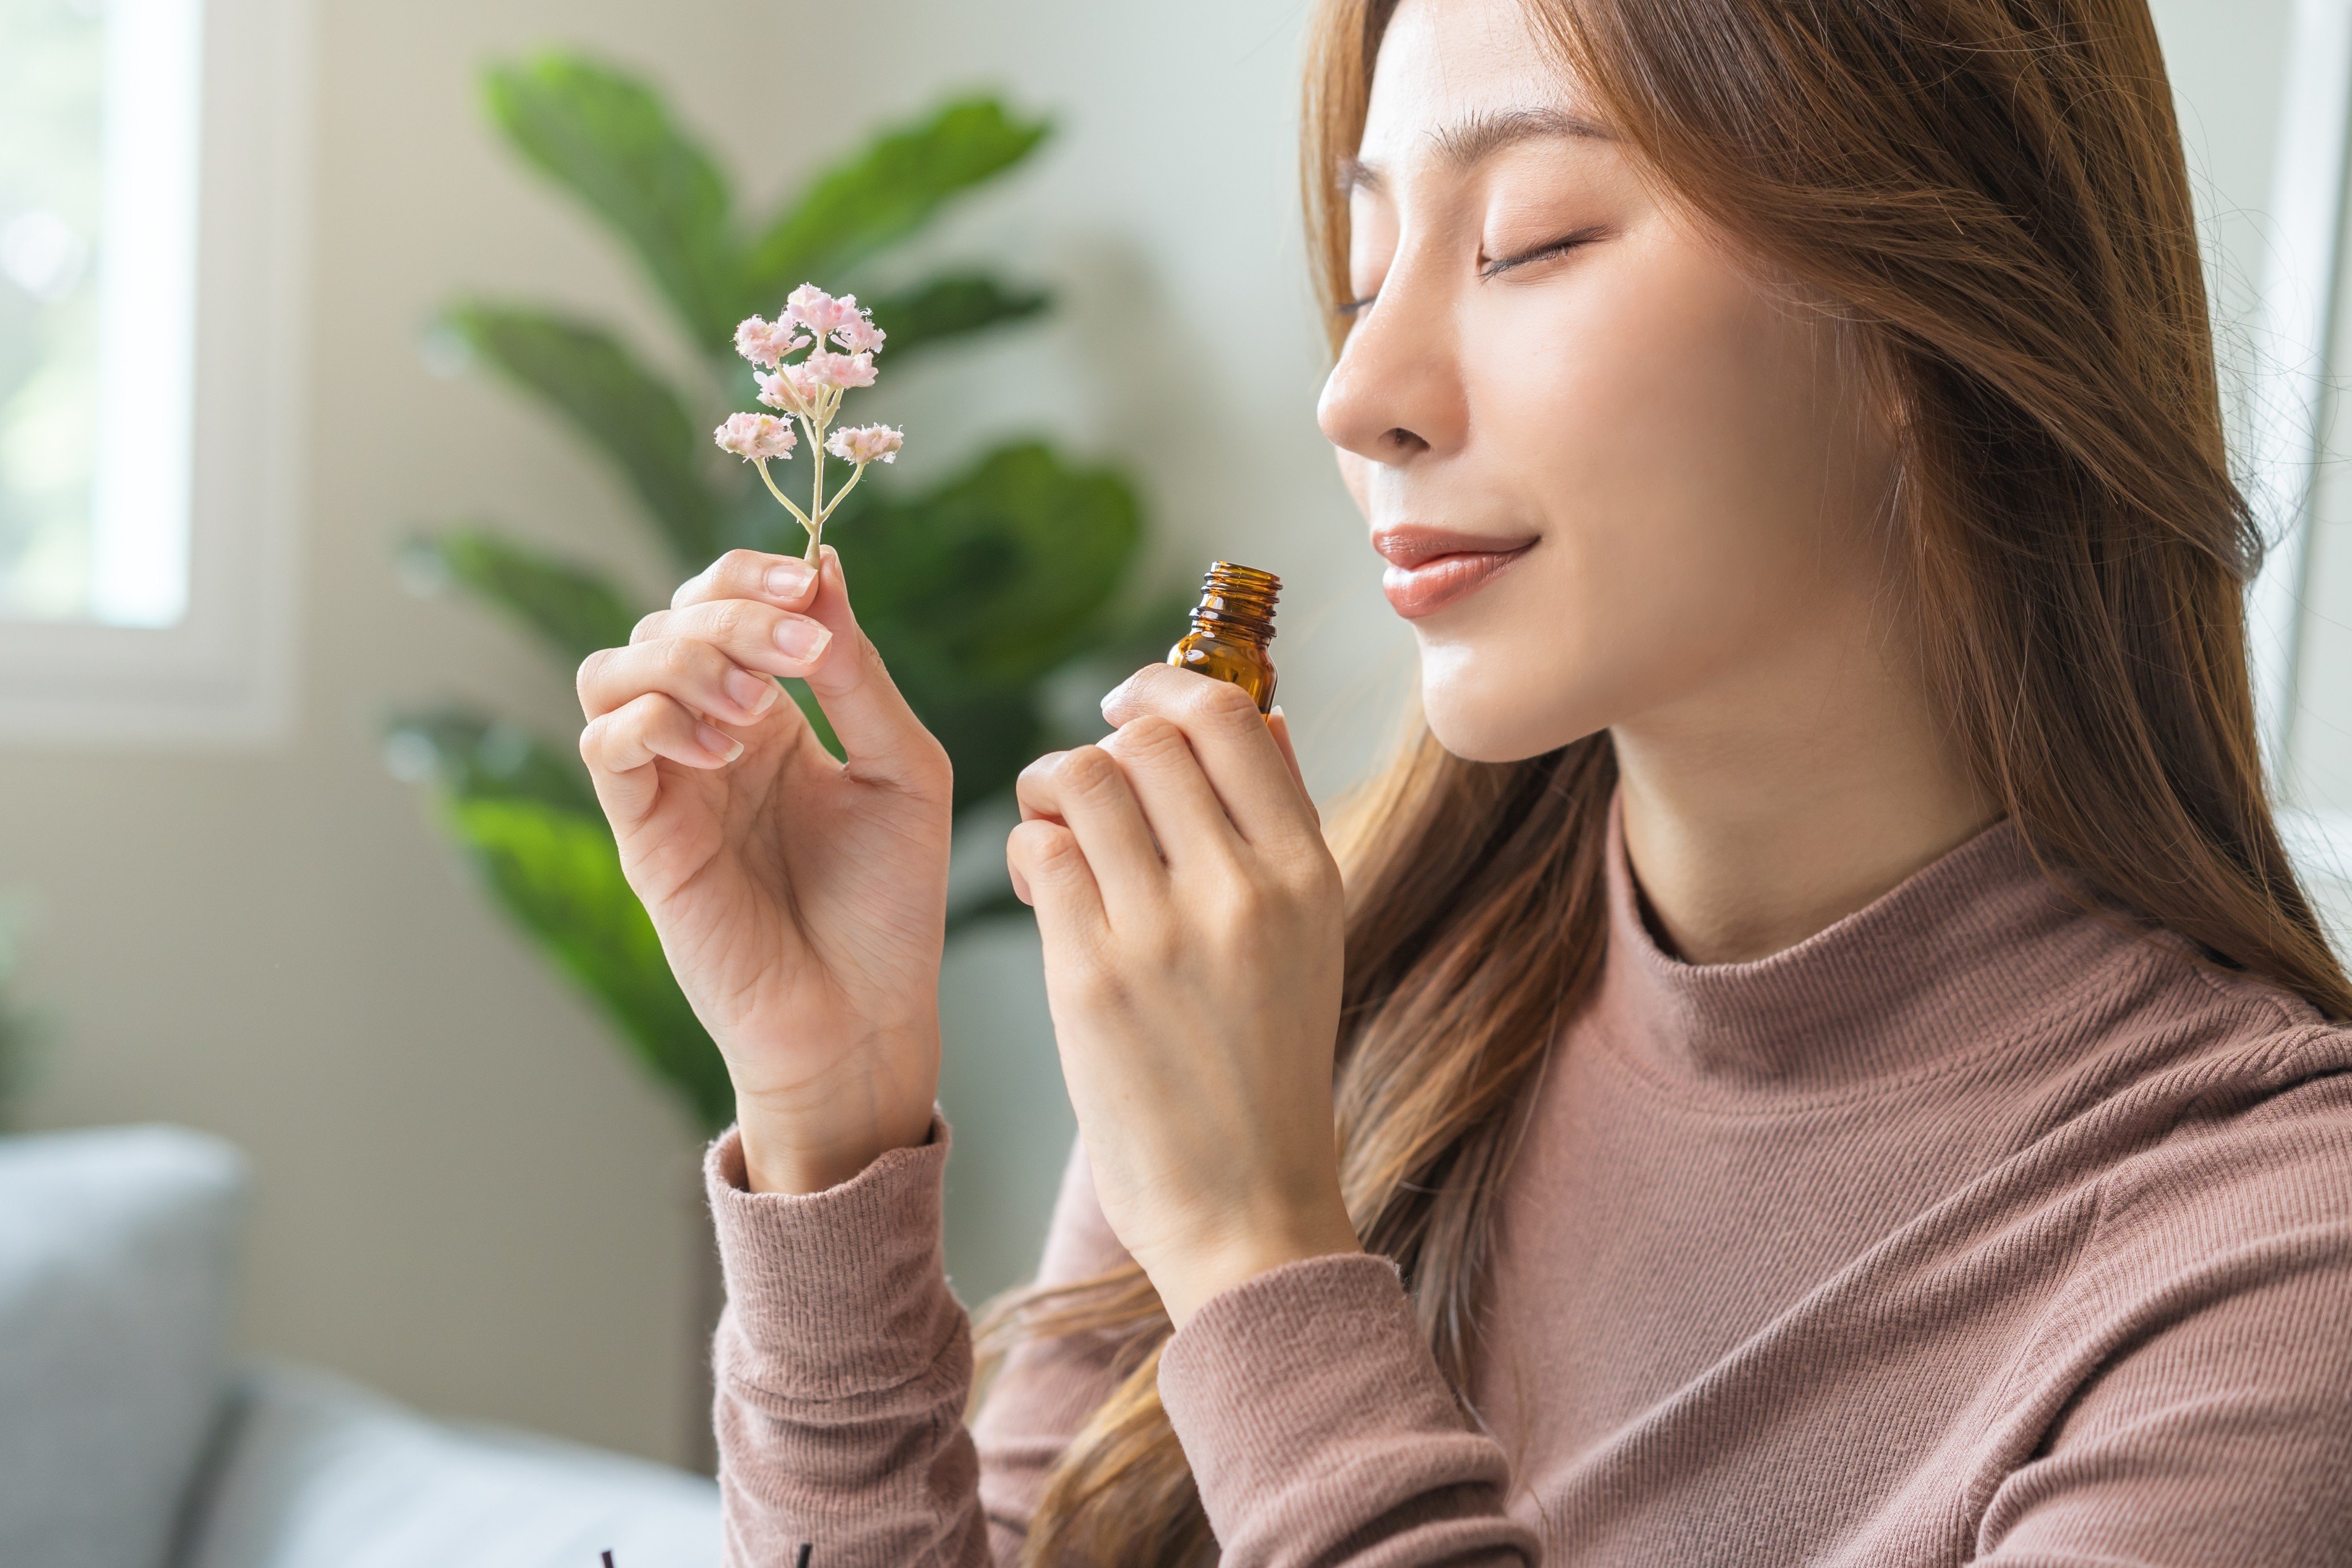 Chinese people used incense and wore scented sachets until the first liquid perfume from Persia arrived, followed by the technology to make it, allowing perfumers to blend sophisticated scents using flower oils. Photo: Shutterstock